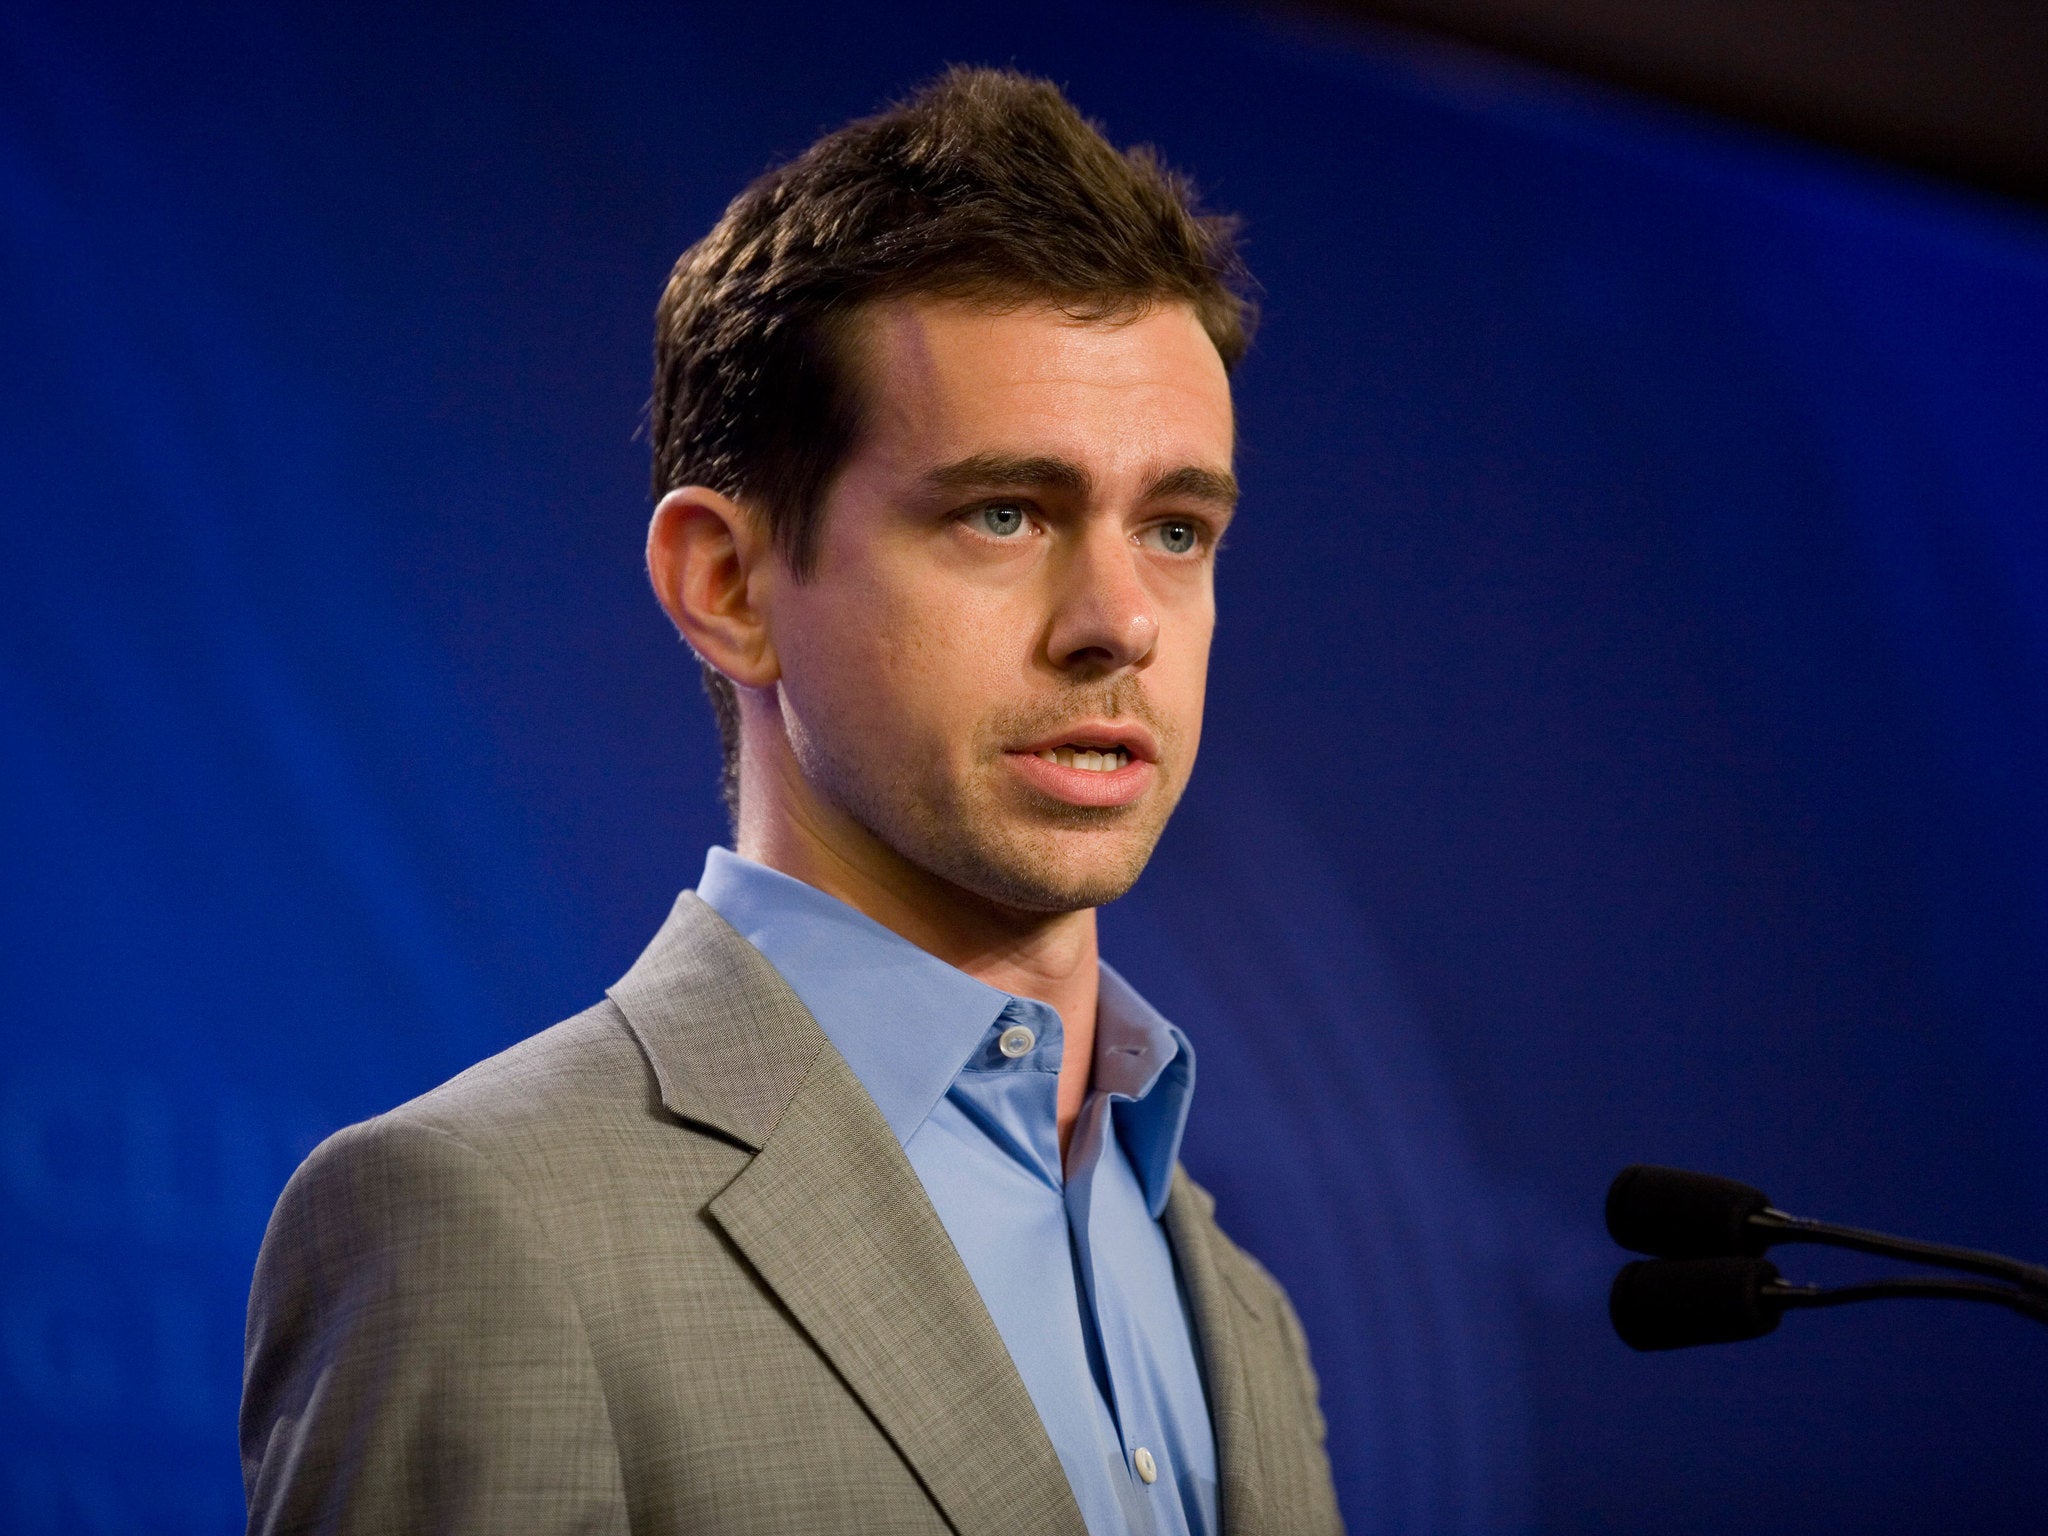 Twitter co-founder Jack Dorsey sent the service's first tweet: "just setting up my twttr". Source: Getty Images